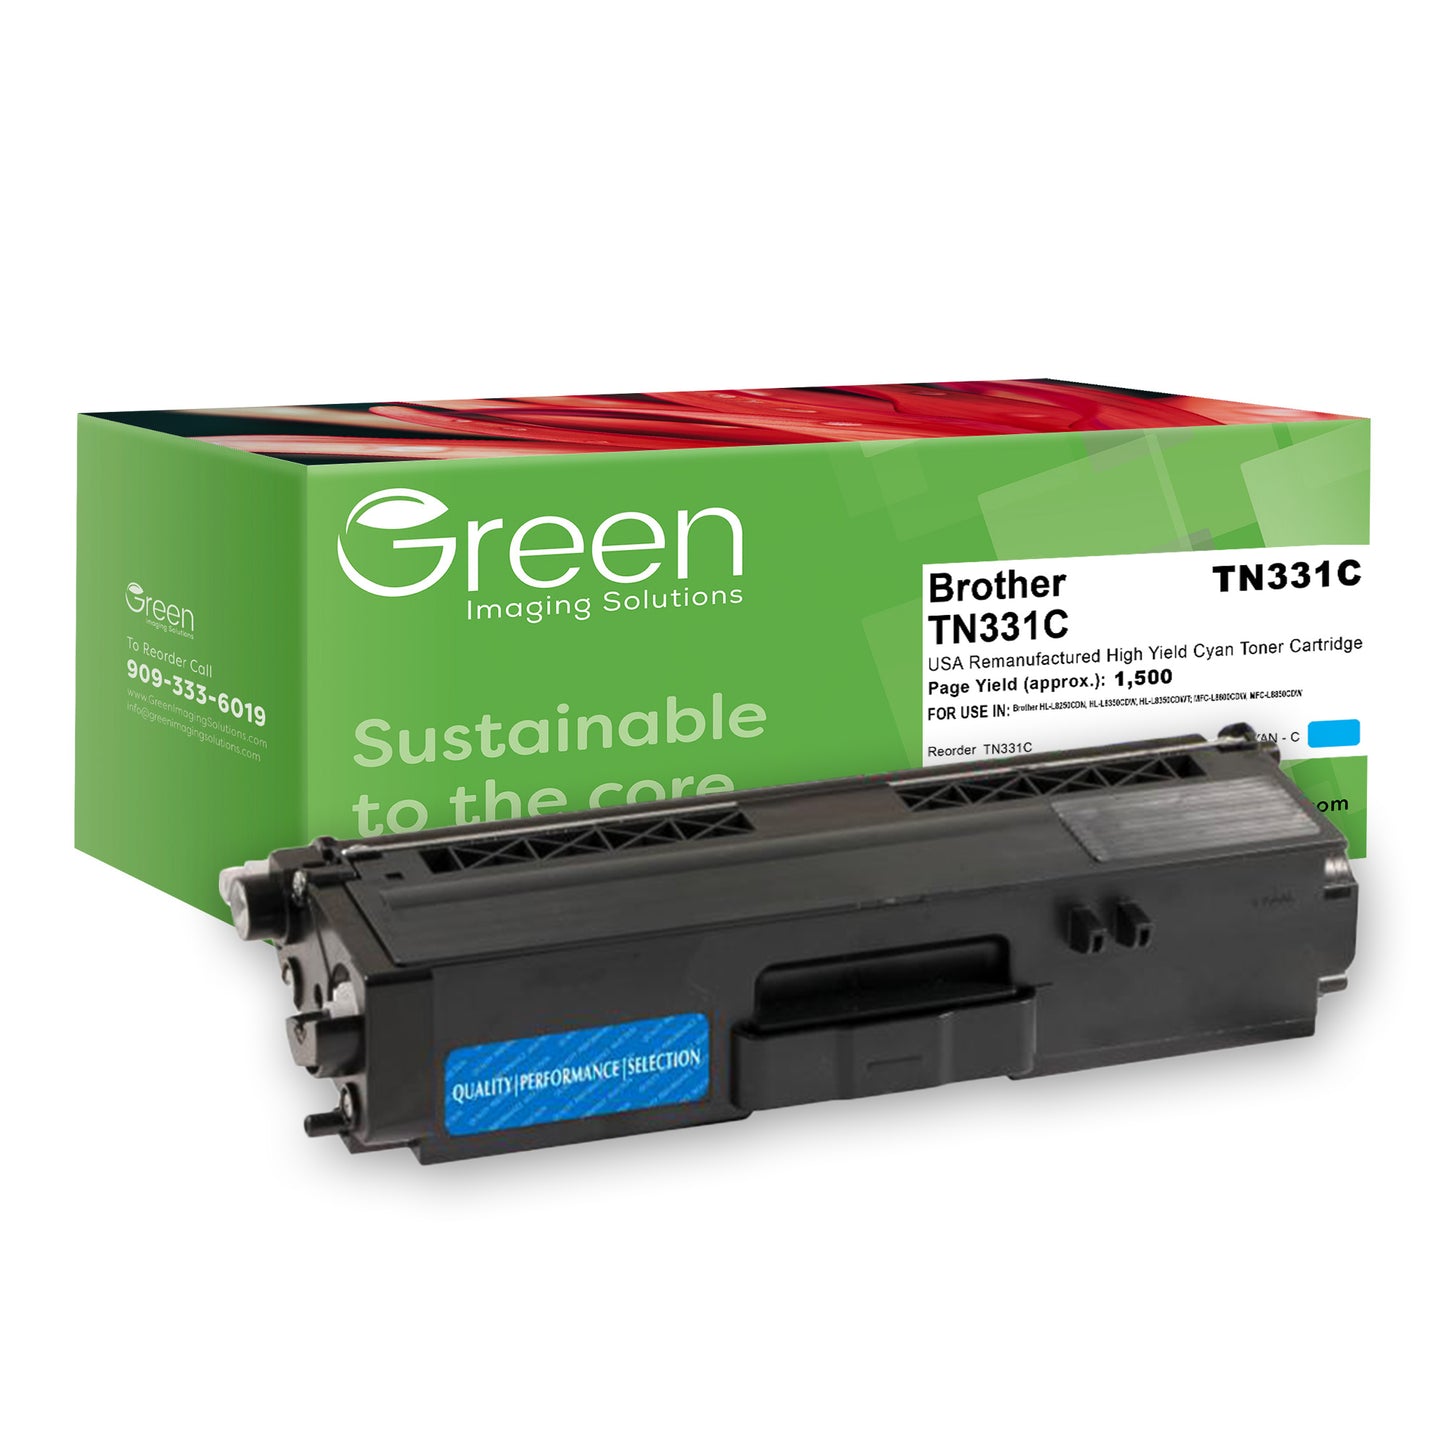 Green Imaging Solutions USA Remanufactured Cyan Toner Cartridge for Brother TN331